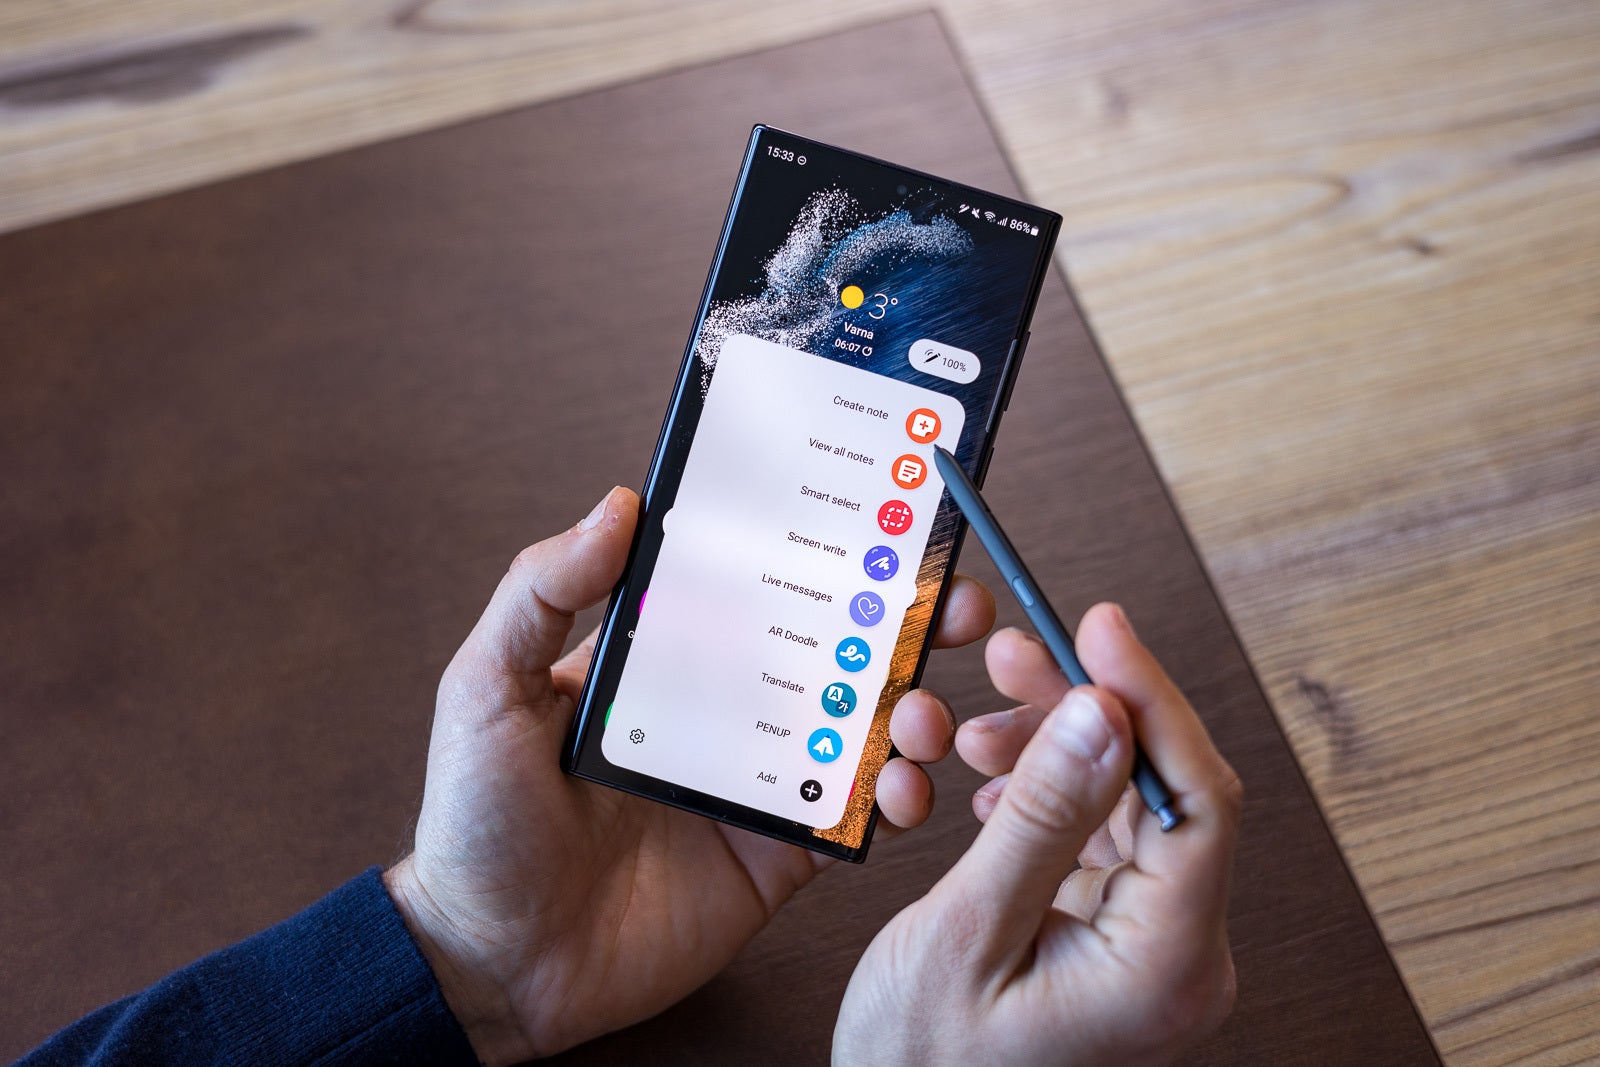 The S22 Ultra (shown here) and the upcoming S23 Ultra offer an integrated stylus and plenty of software features - How the Galaxy S23 Ultra will break my vicious iPhone cycle (and why it's so hard to stop using phones Apple in favor of Android)